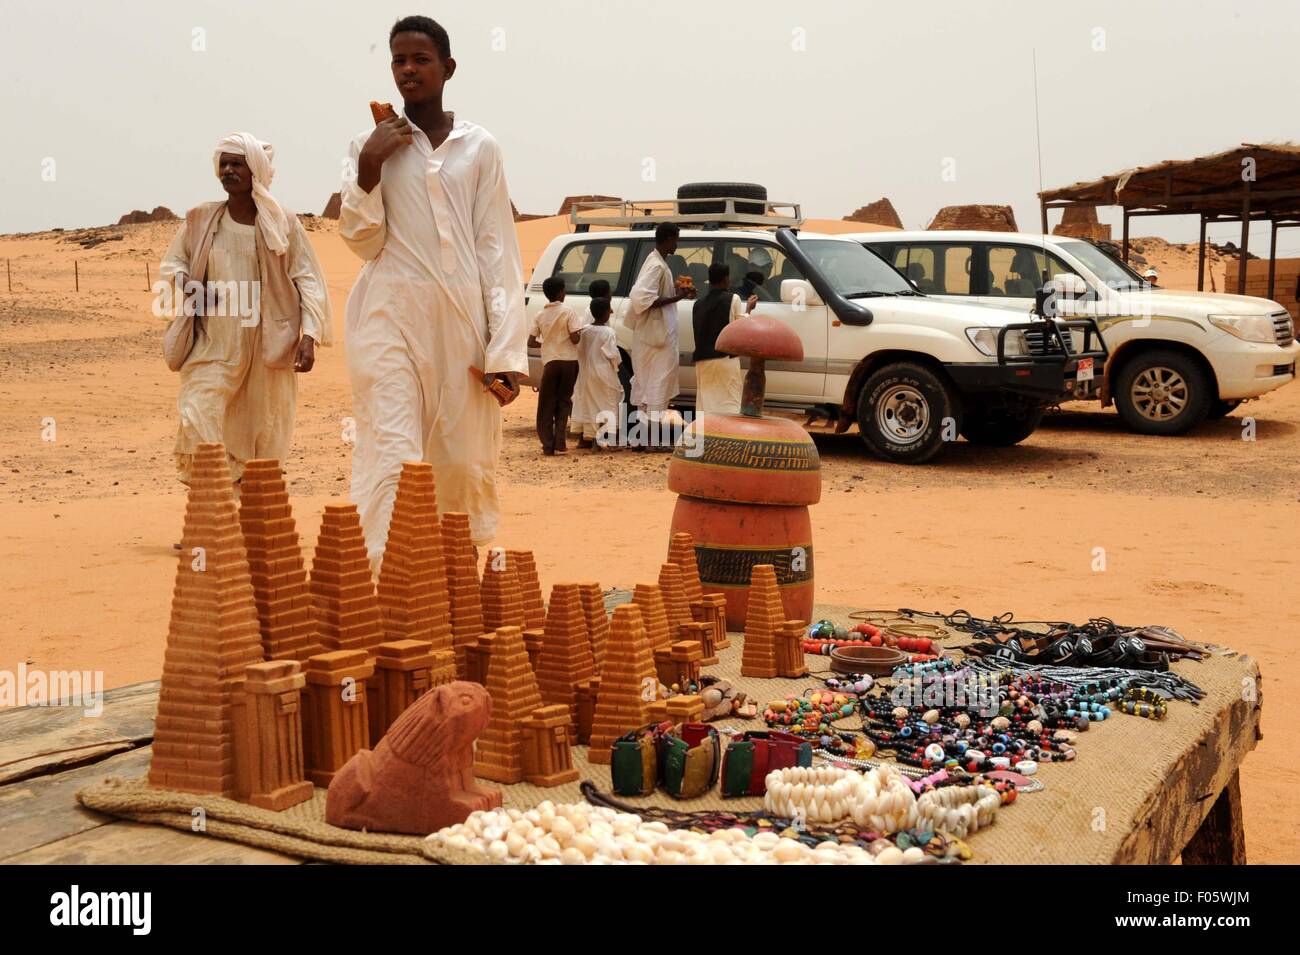 Khartoum. 7th Aug, 2015. Vendors sell souvenirs in Meroe, 250km north of Khartoum, capital of Sudan, on Aug.7, 2015. The Archaeological Sites of the Island of Meroe, a semi-desert landscape between the Nile and Atbara rivers, was the heartland of the Kingdom of Kush, a major power from the 8th century B.C. to the 4th century A.D. The property consists of the royal city of the Kushite kings at Meroe, near the River Nile, the nearby religious site of Naqa and Musawwarat es Sufra. © Li Ziheng/Xinhua/Alamy Live News Stock Photo